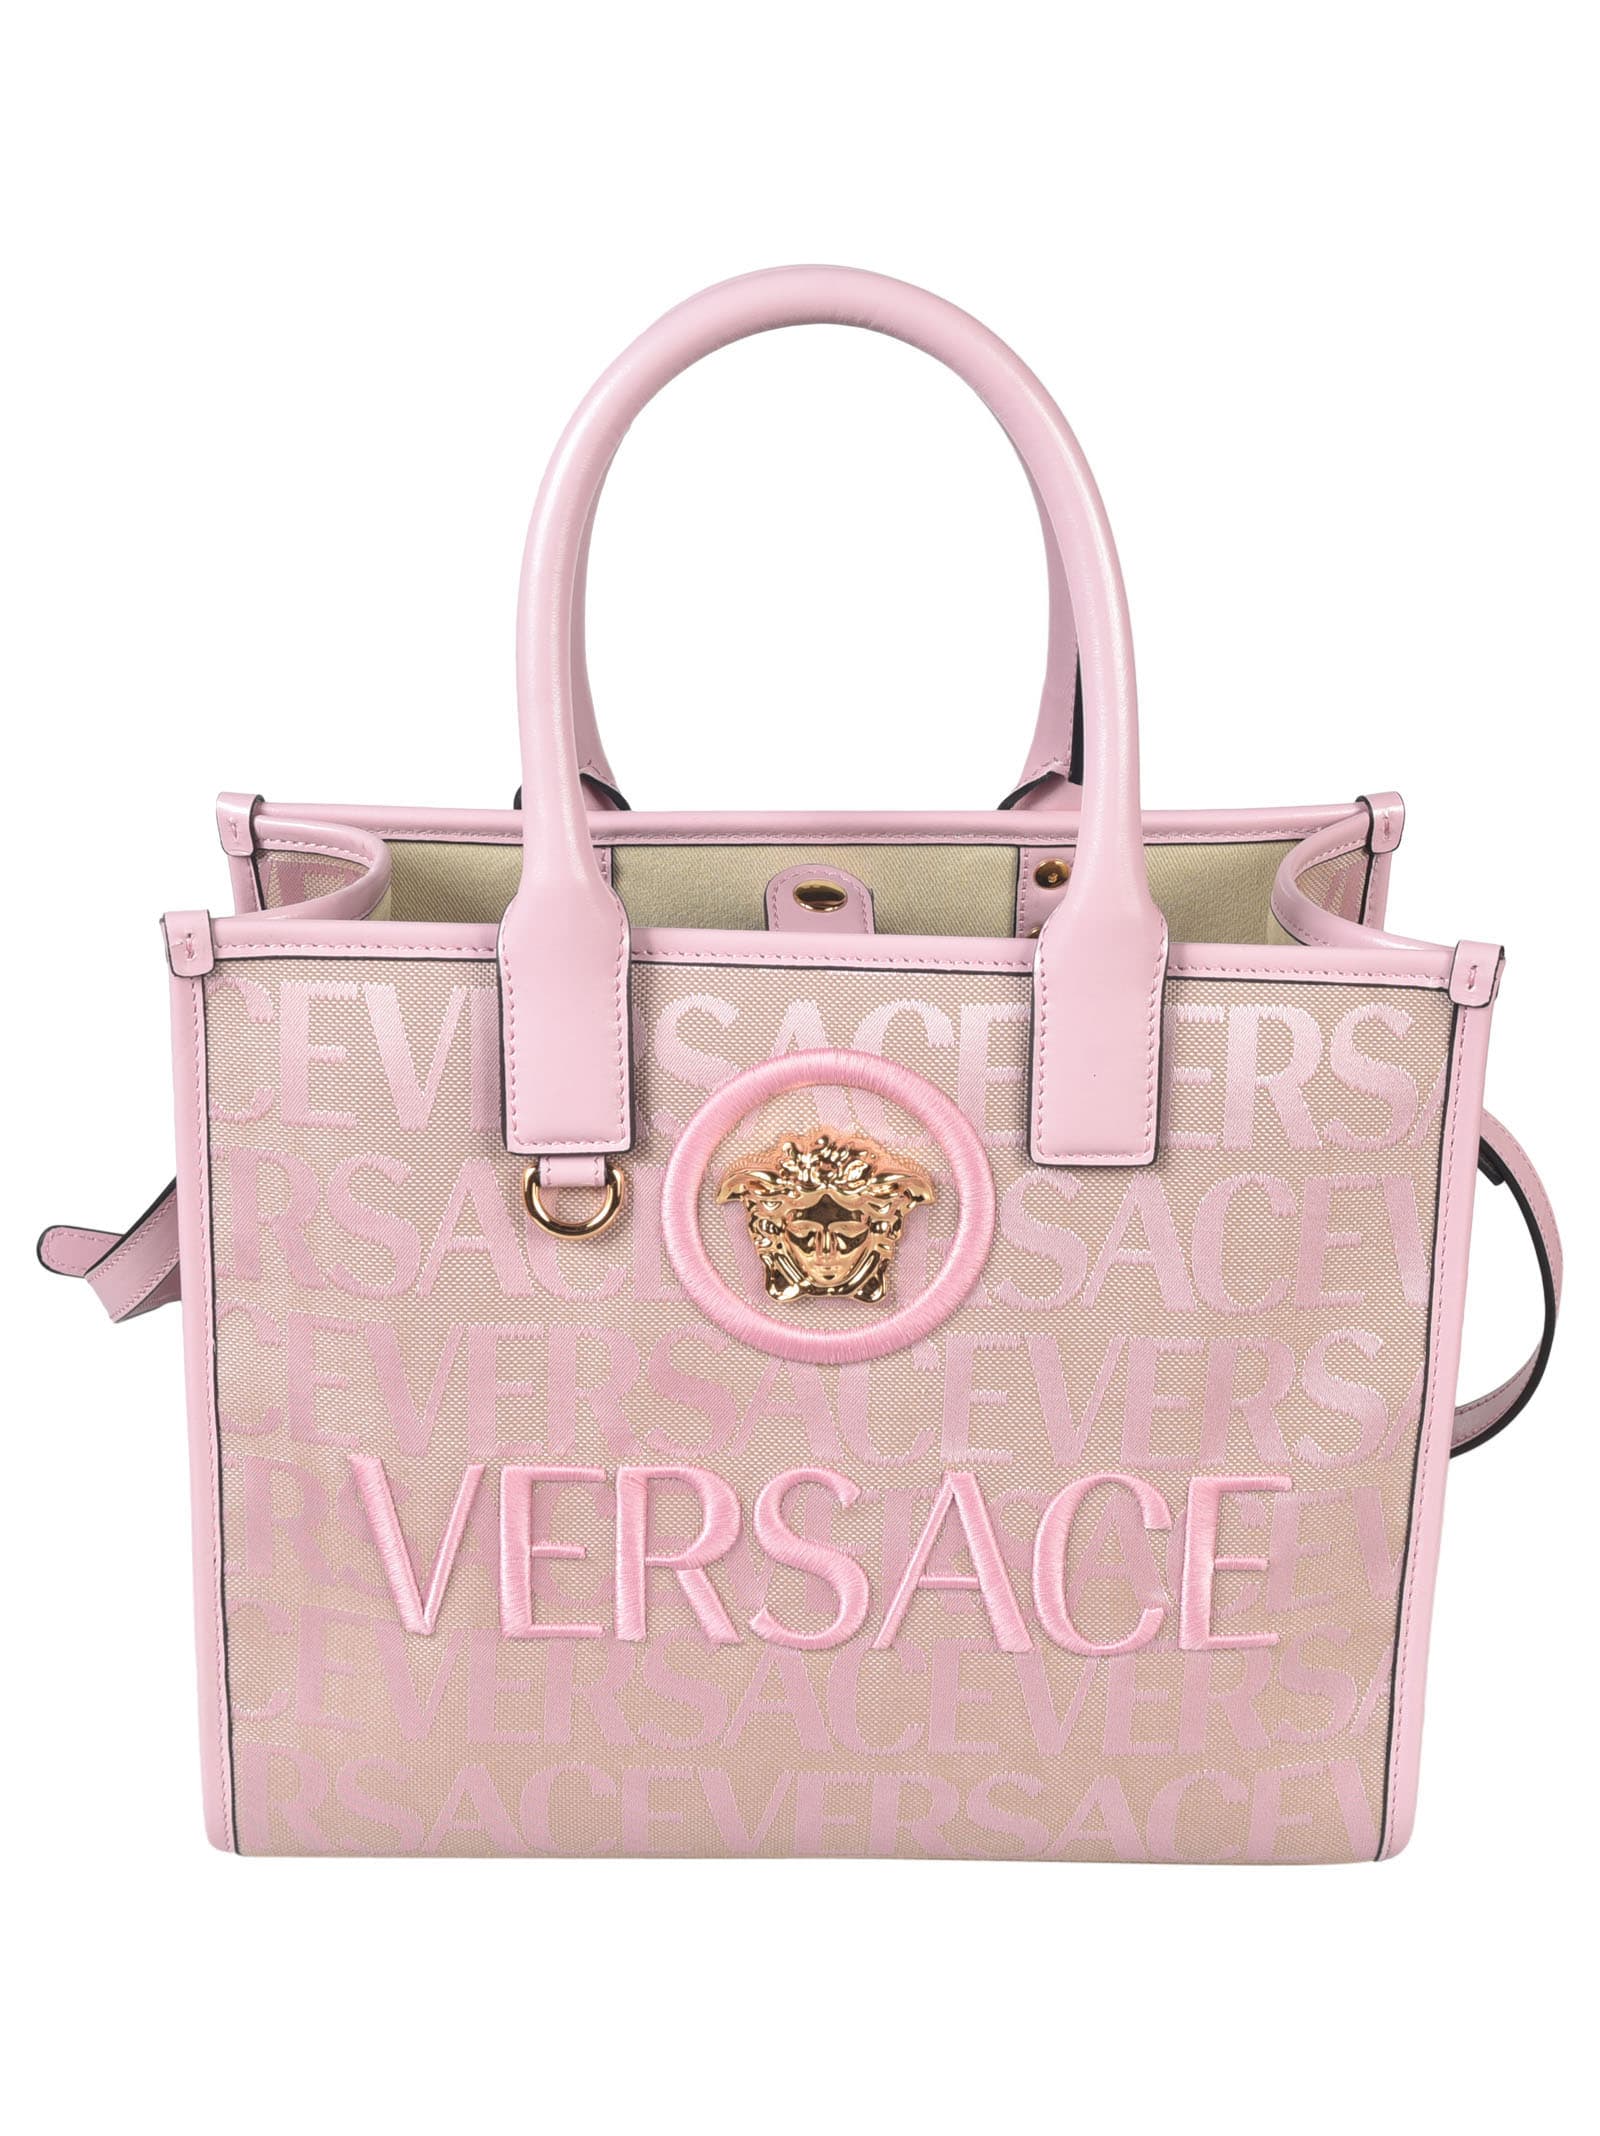 VERSACE LOGO EMBROIDERED TOTE